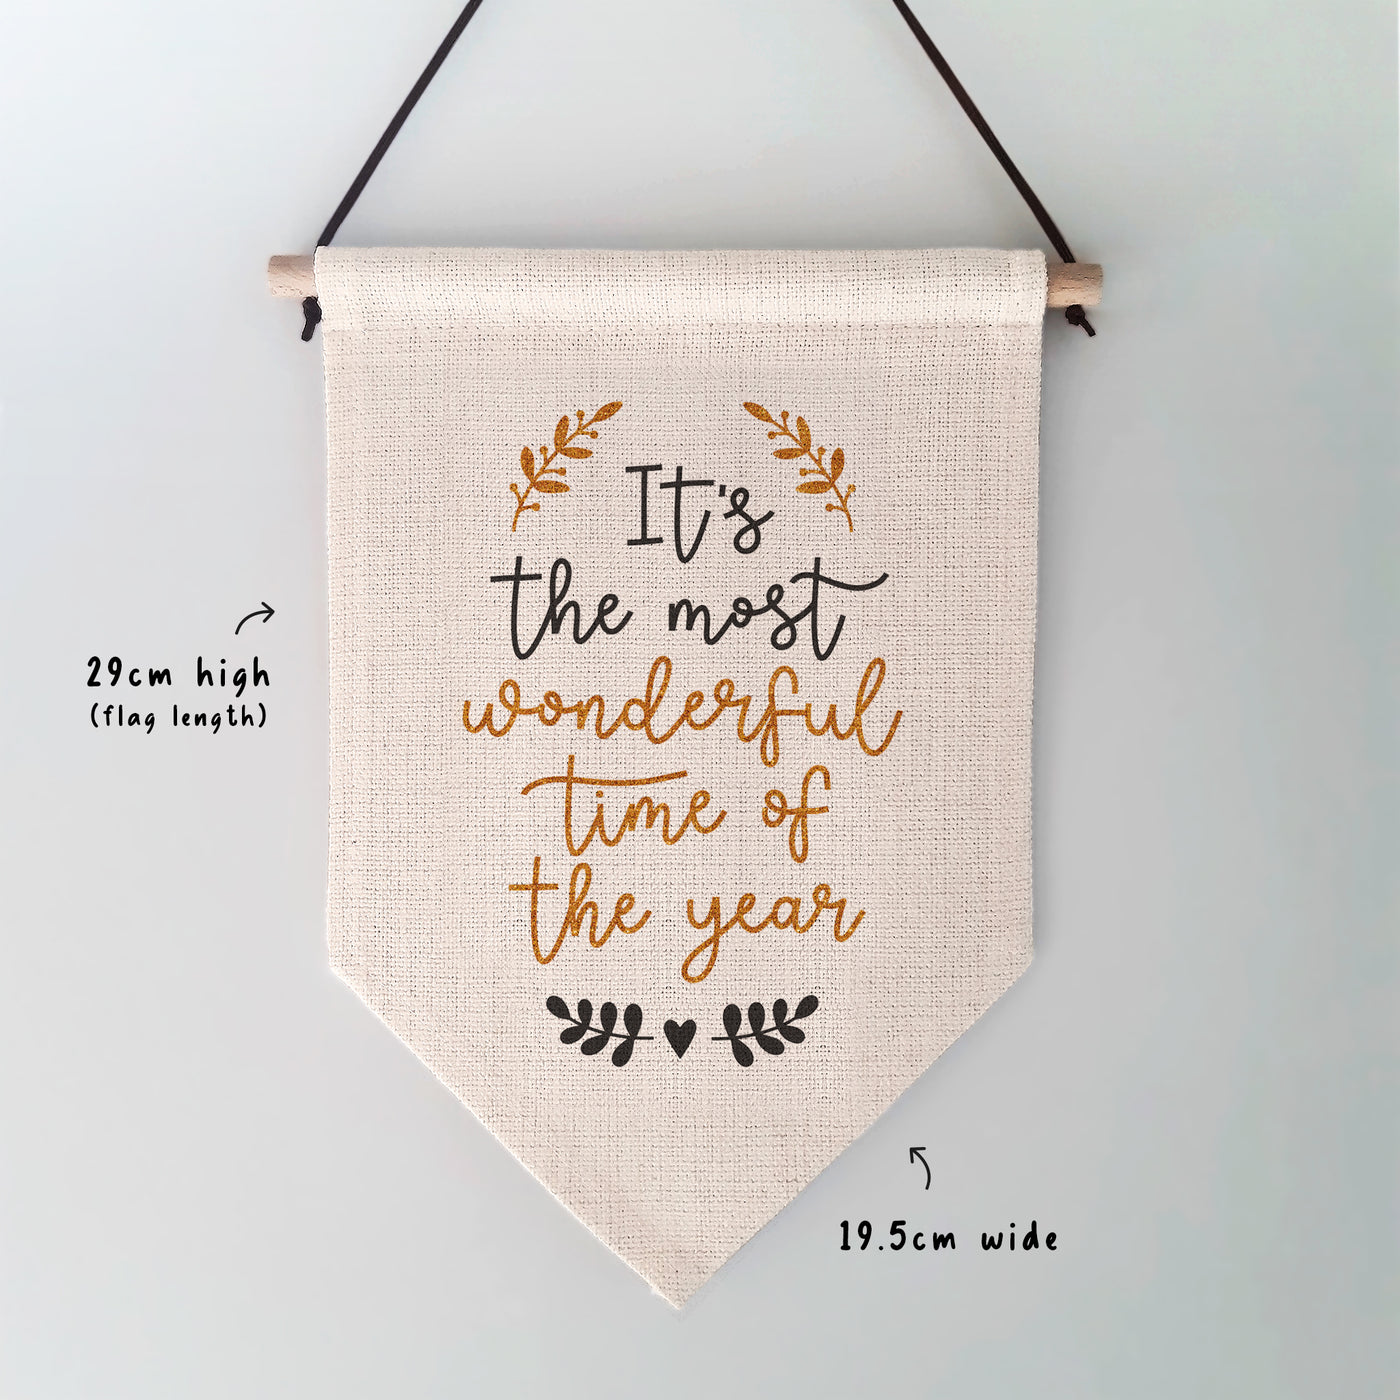 It's The Most Wonderful Time of the Year Christmas Wall Hanging